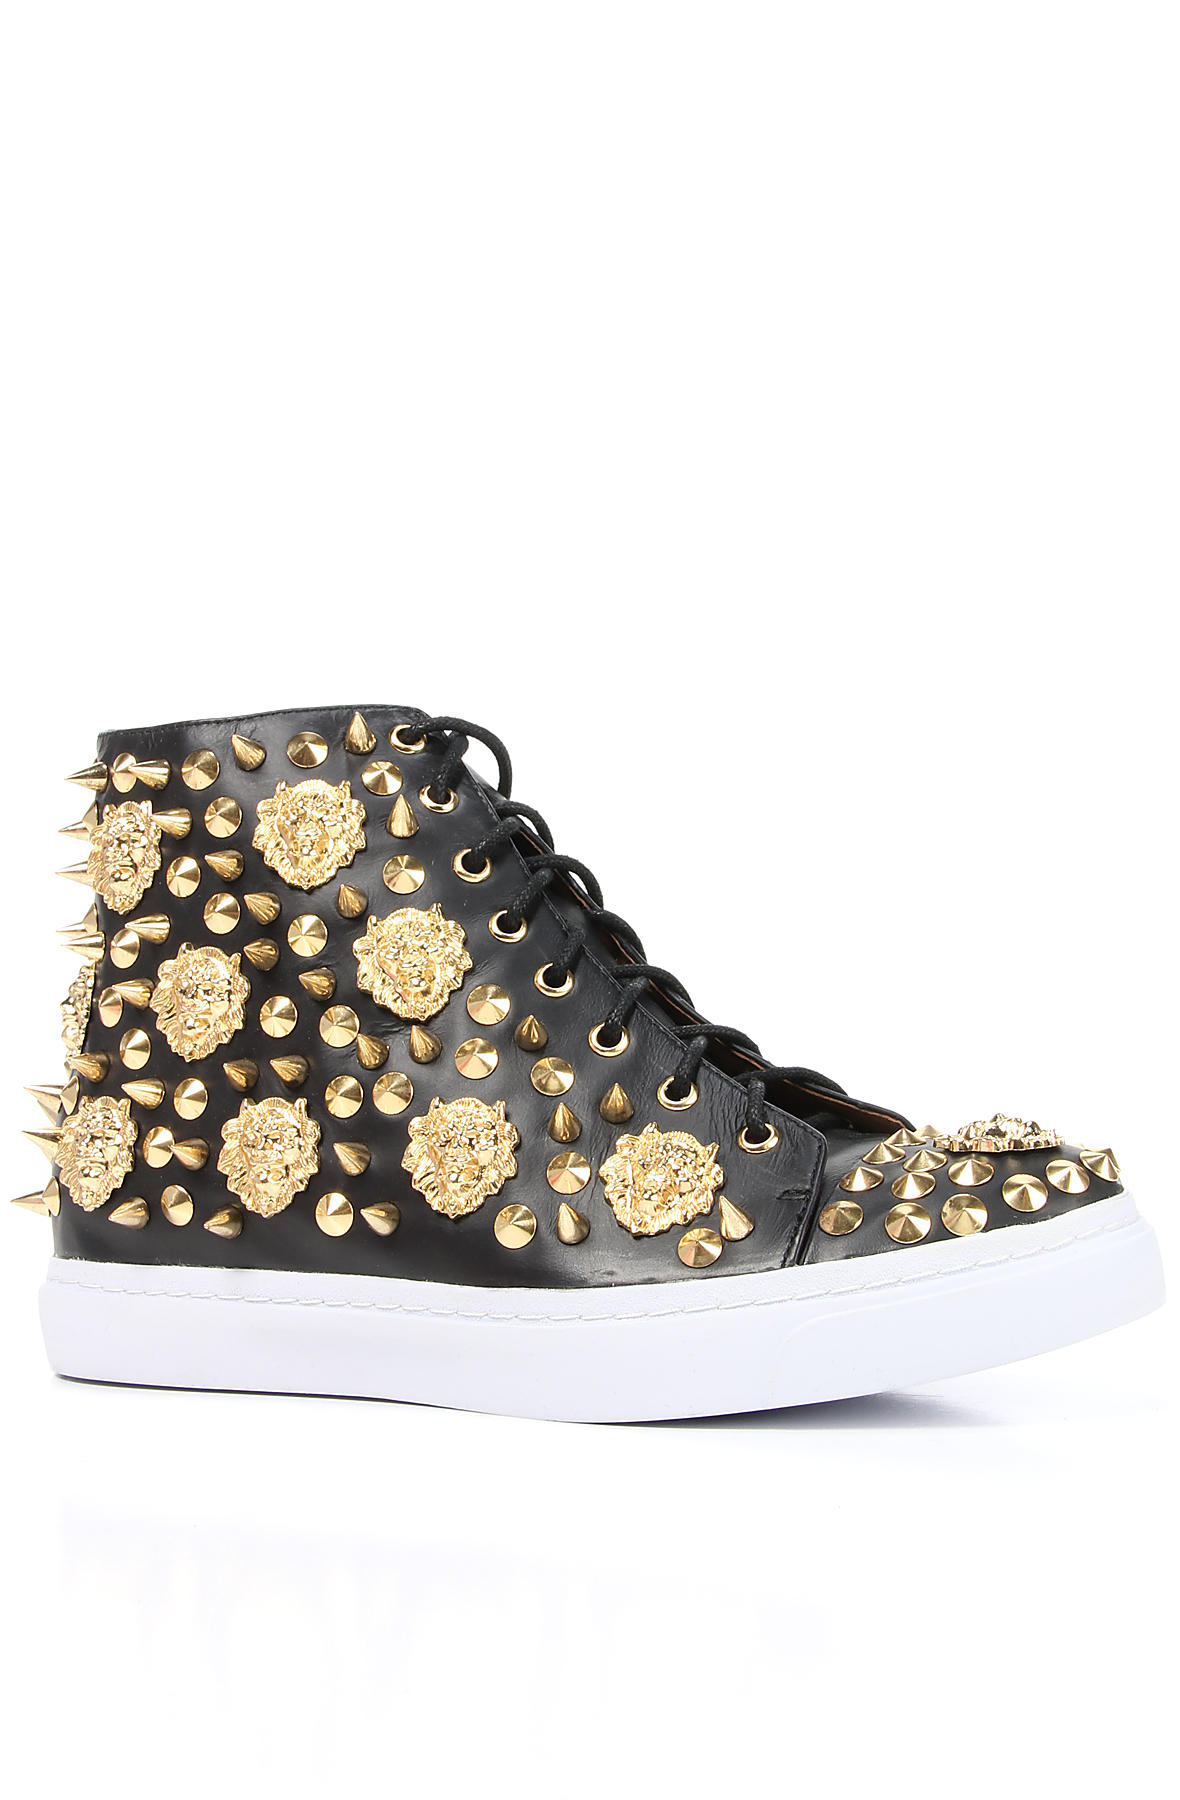 Campbell Sneaker Spiked Black Gold